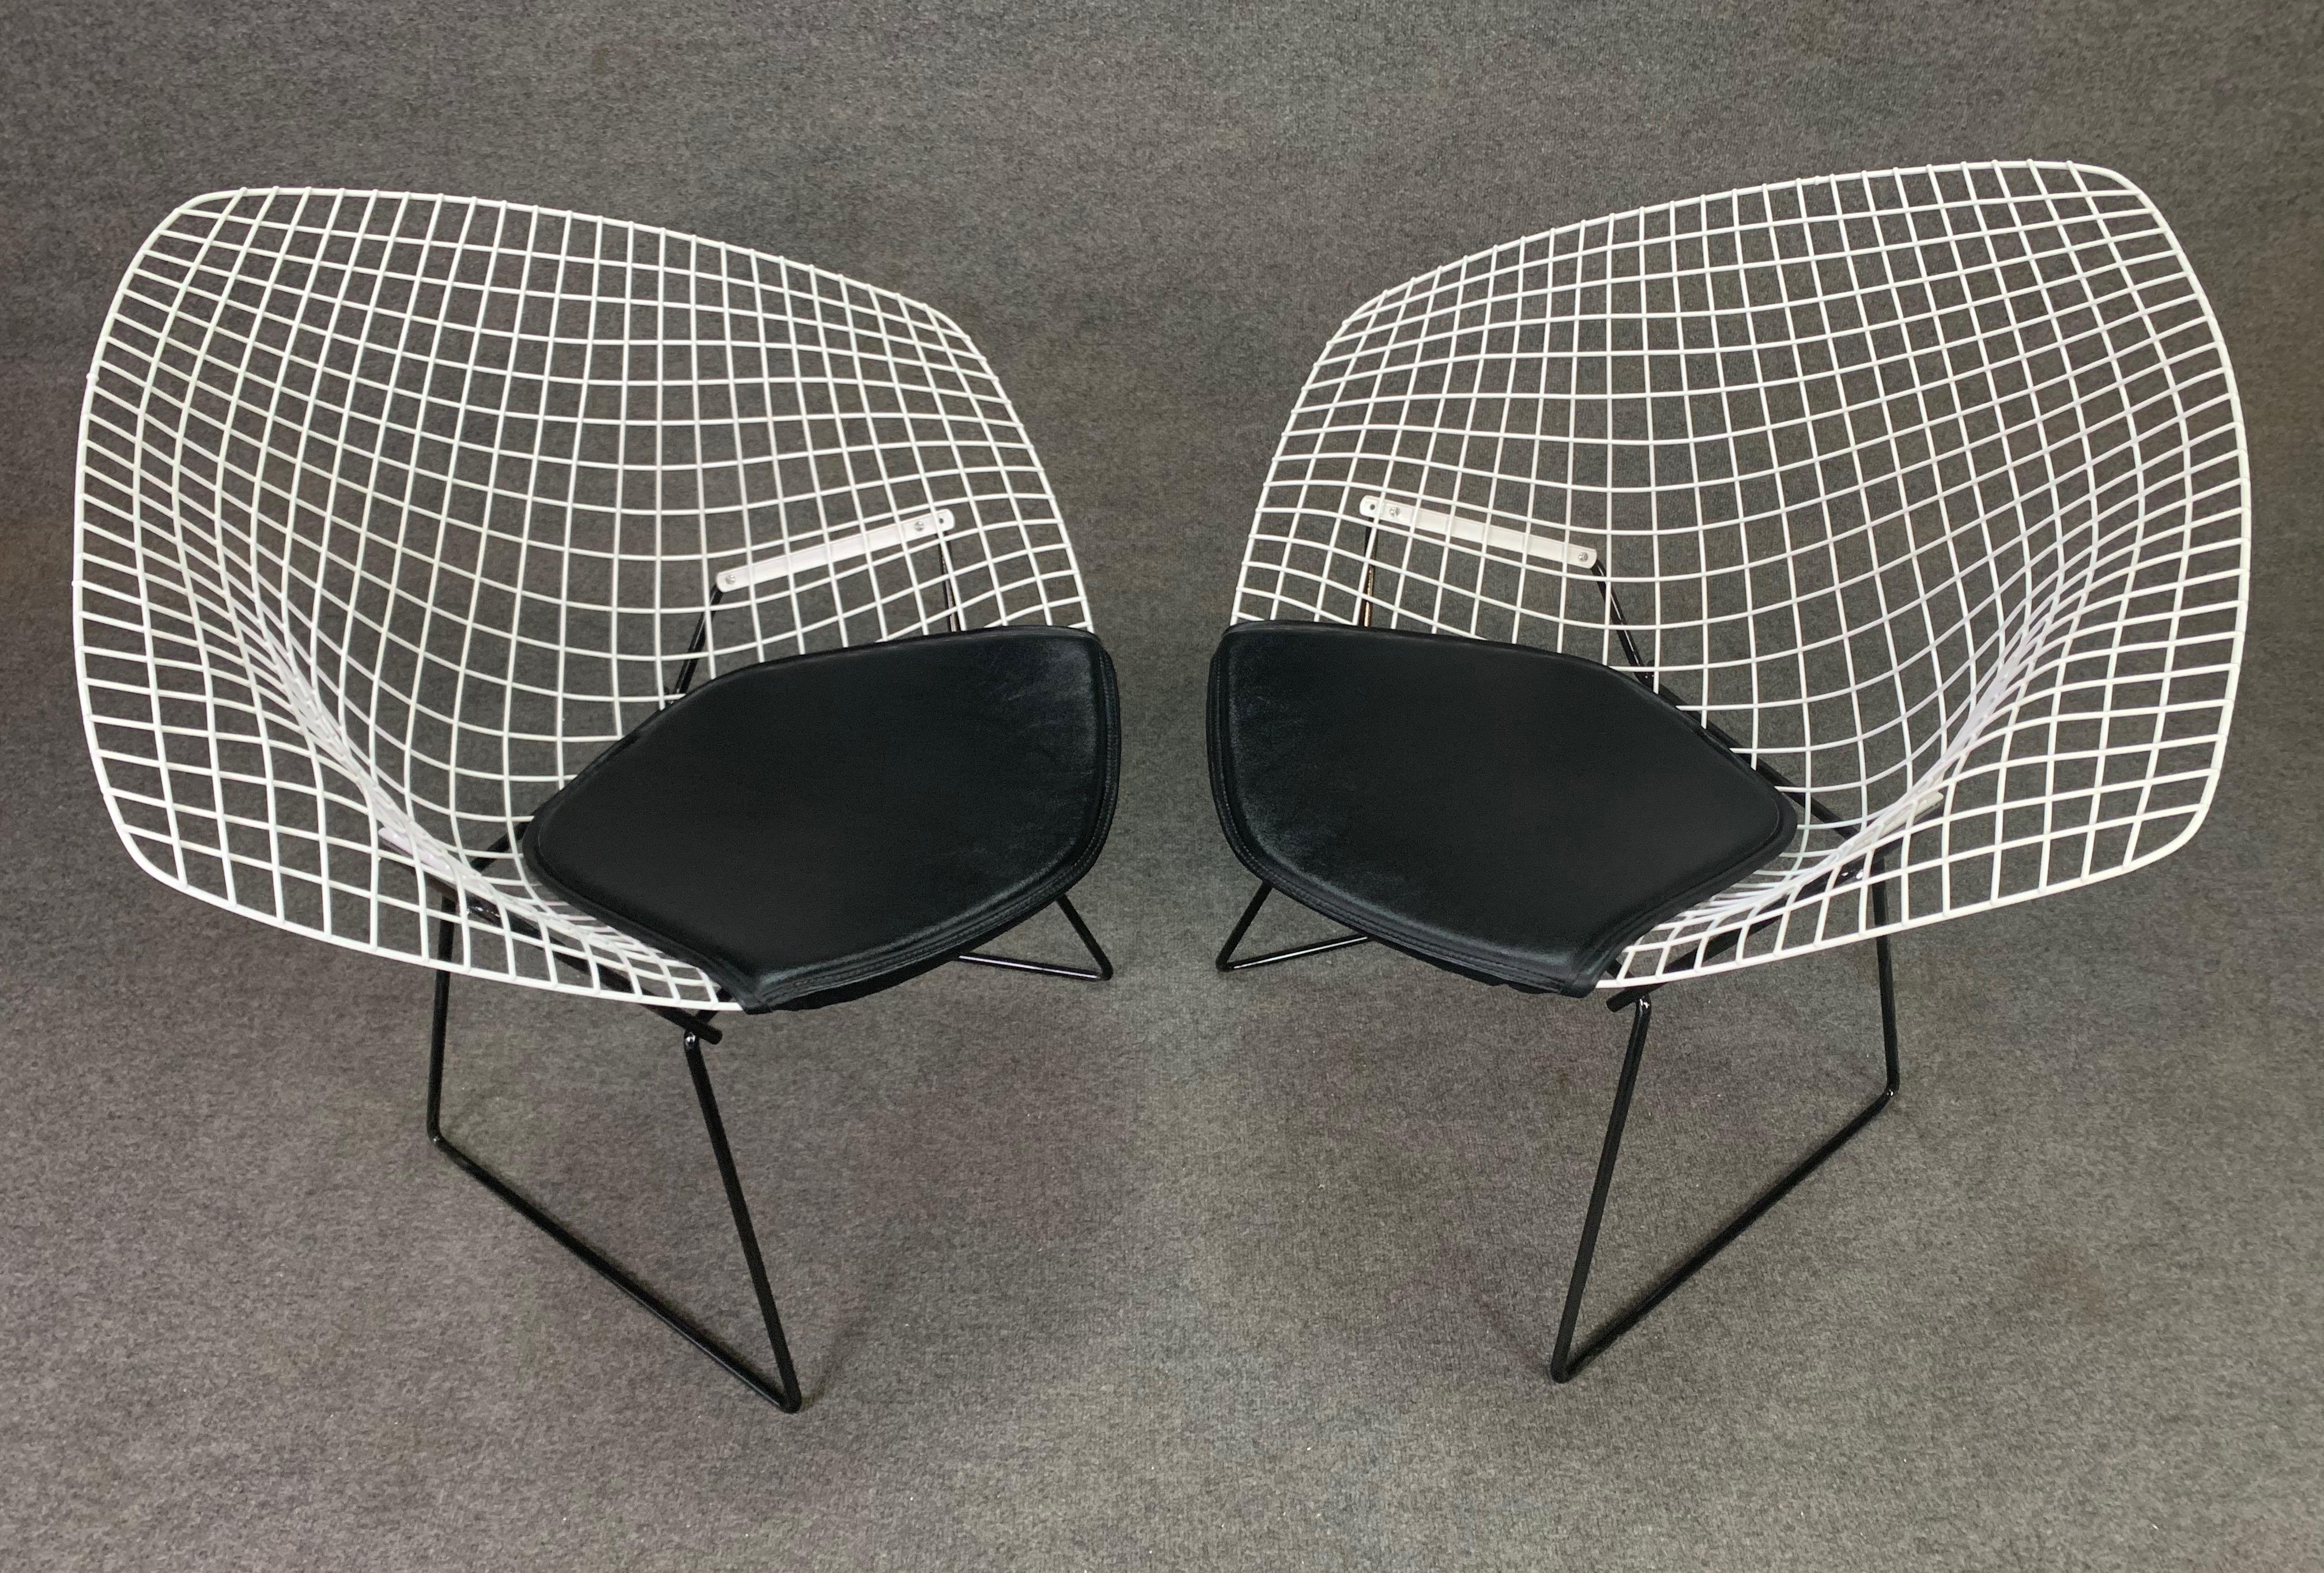 Mid-20th Century Pair of Vintage Mid-Century Modern Diamond Chairs by Harry Bertoia for Knoll